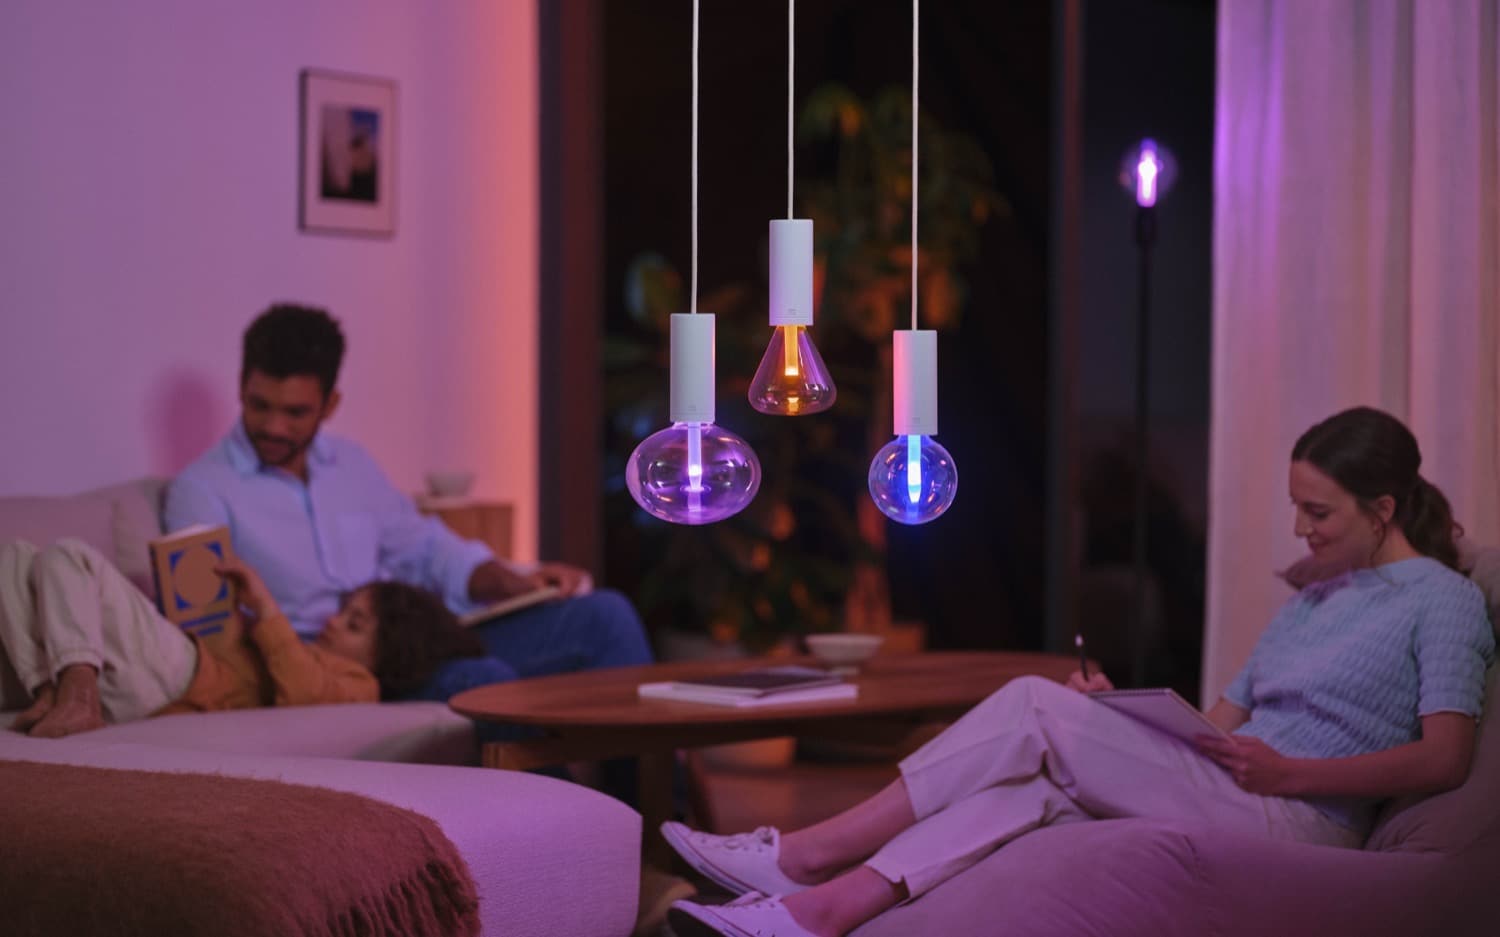 Hueblog: Philips Hue announces new products and features